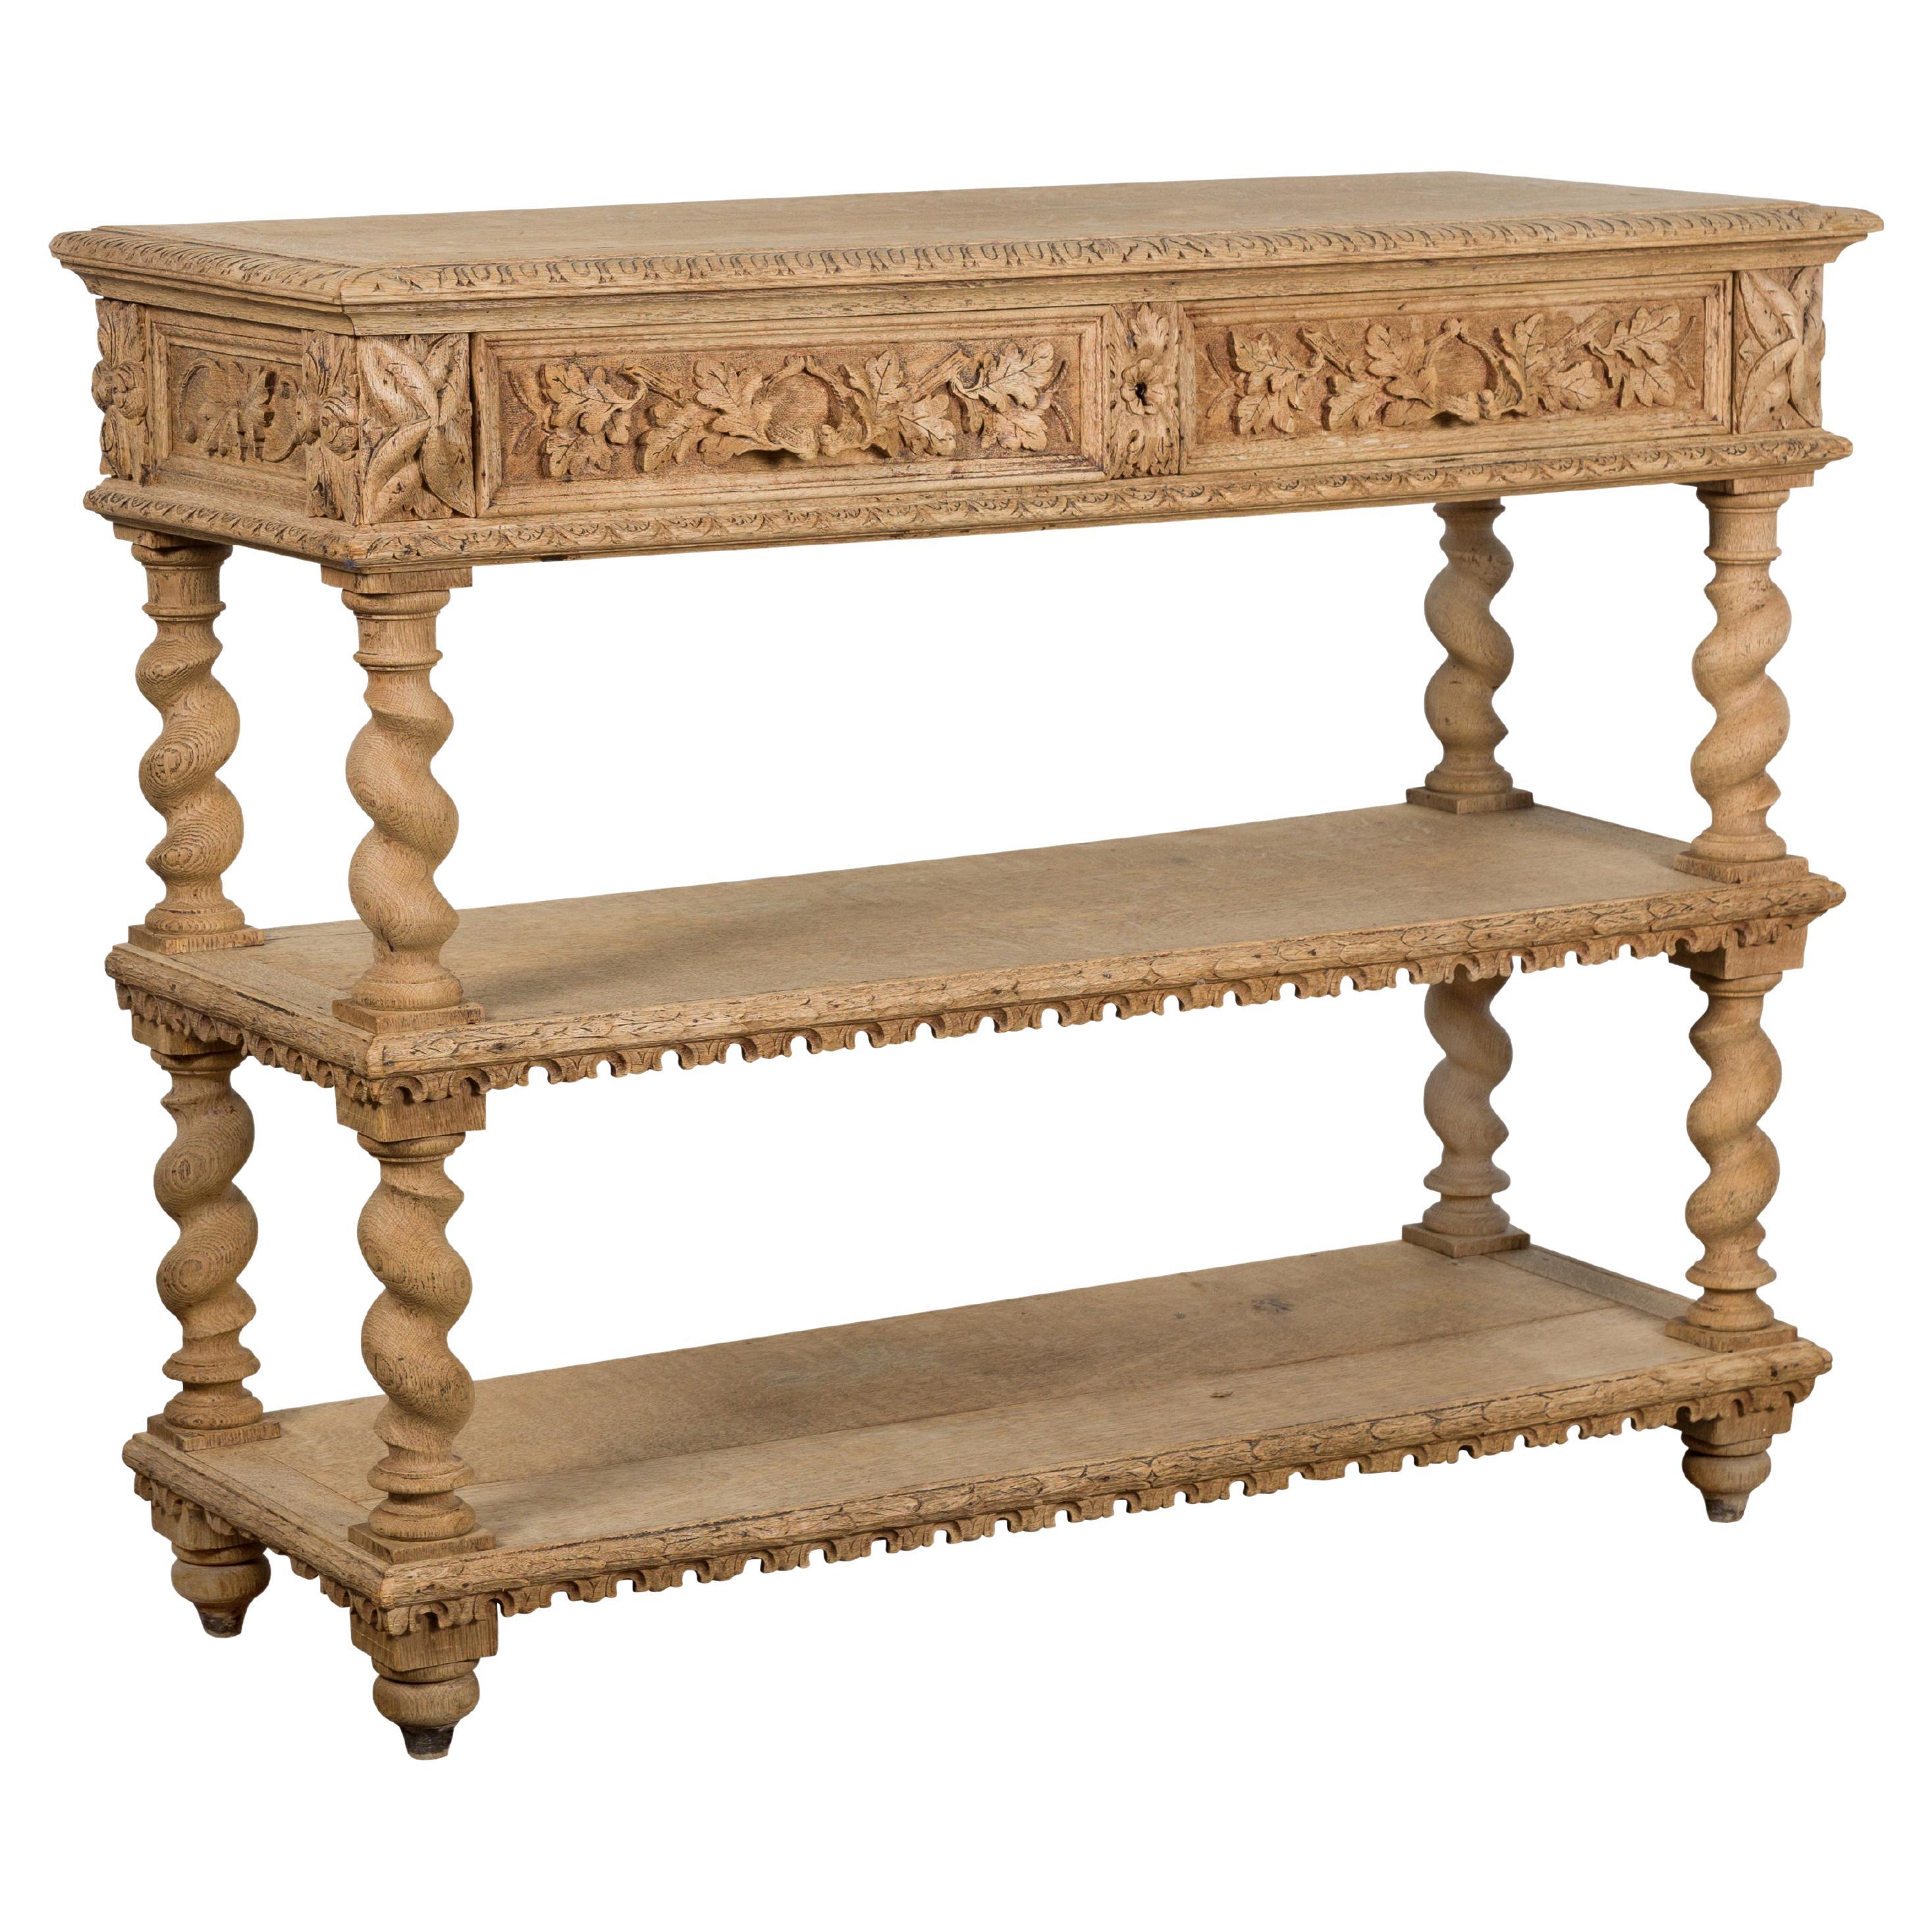 English 1880s Oak Barley Twist Console Table with Two Foliage Carved Drawers For Sale